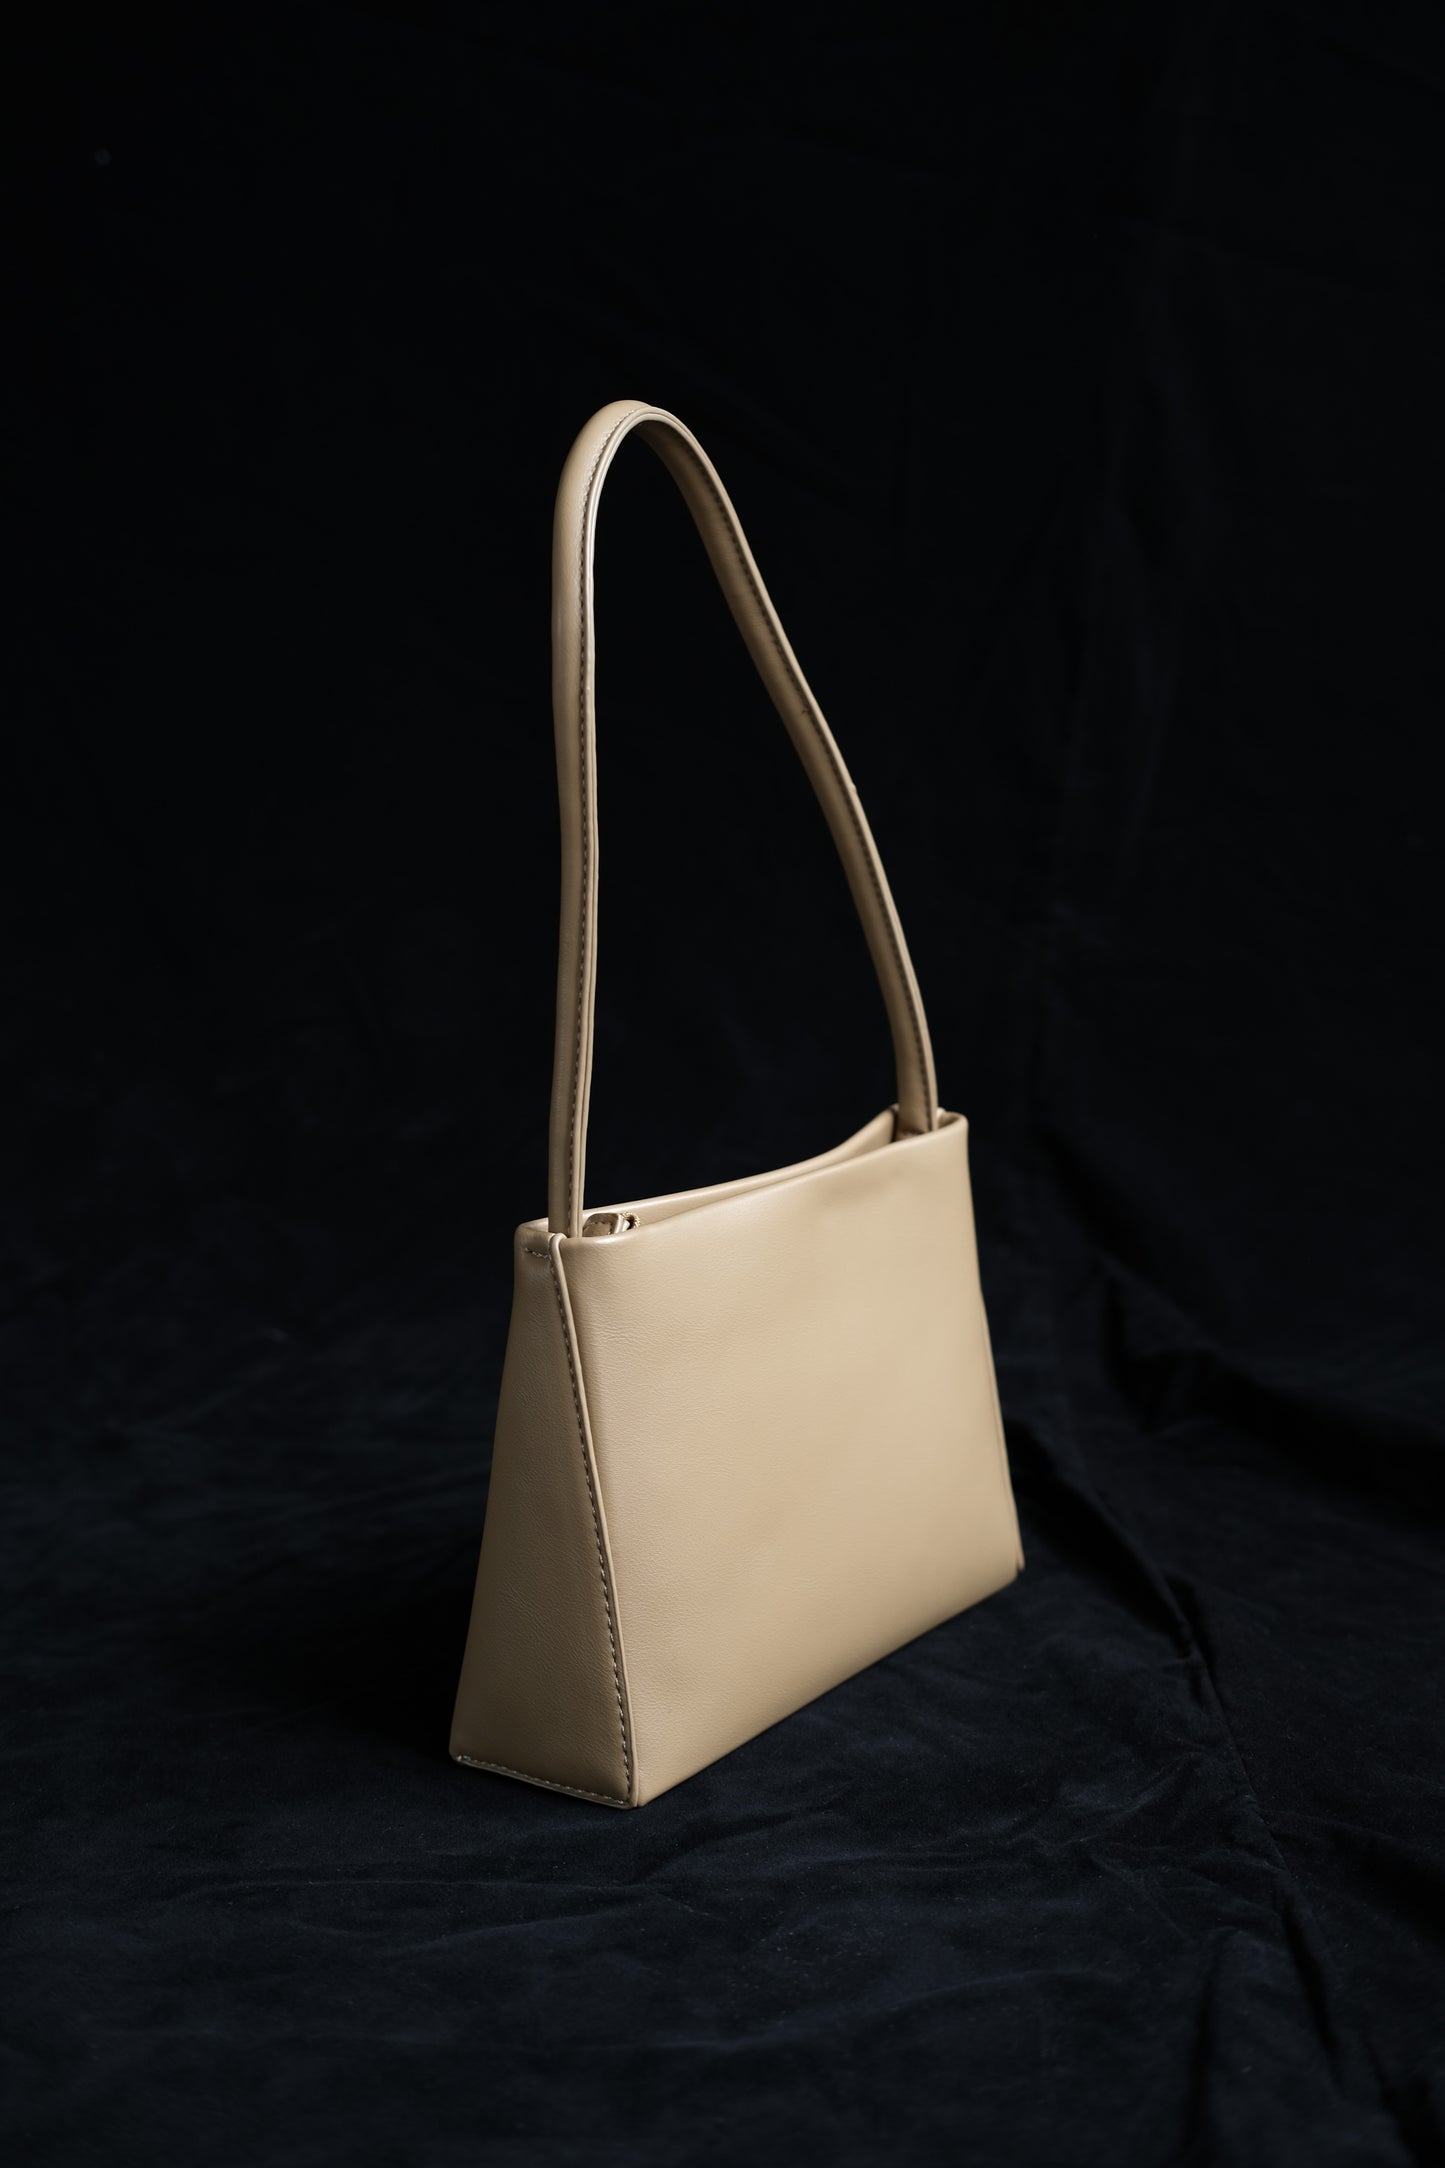 Square tote bag with one shoulder under the armpits in khaki